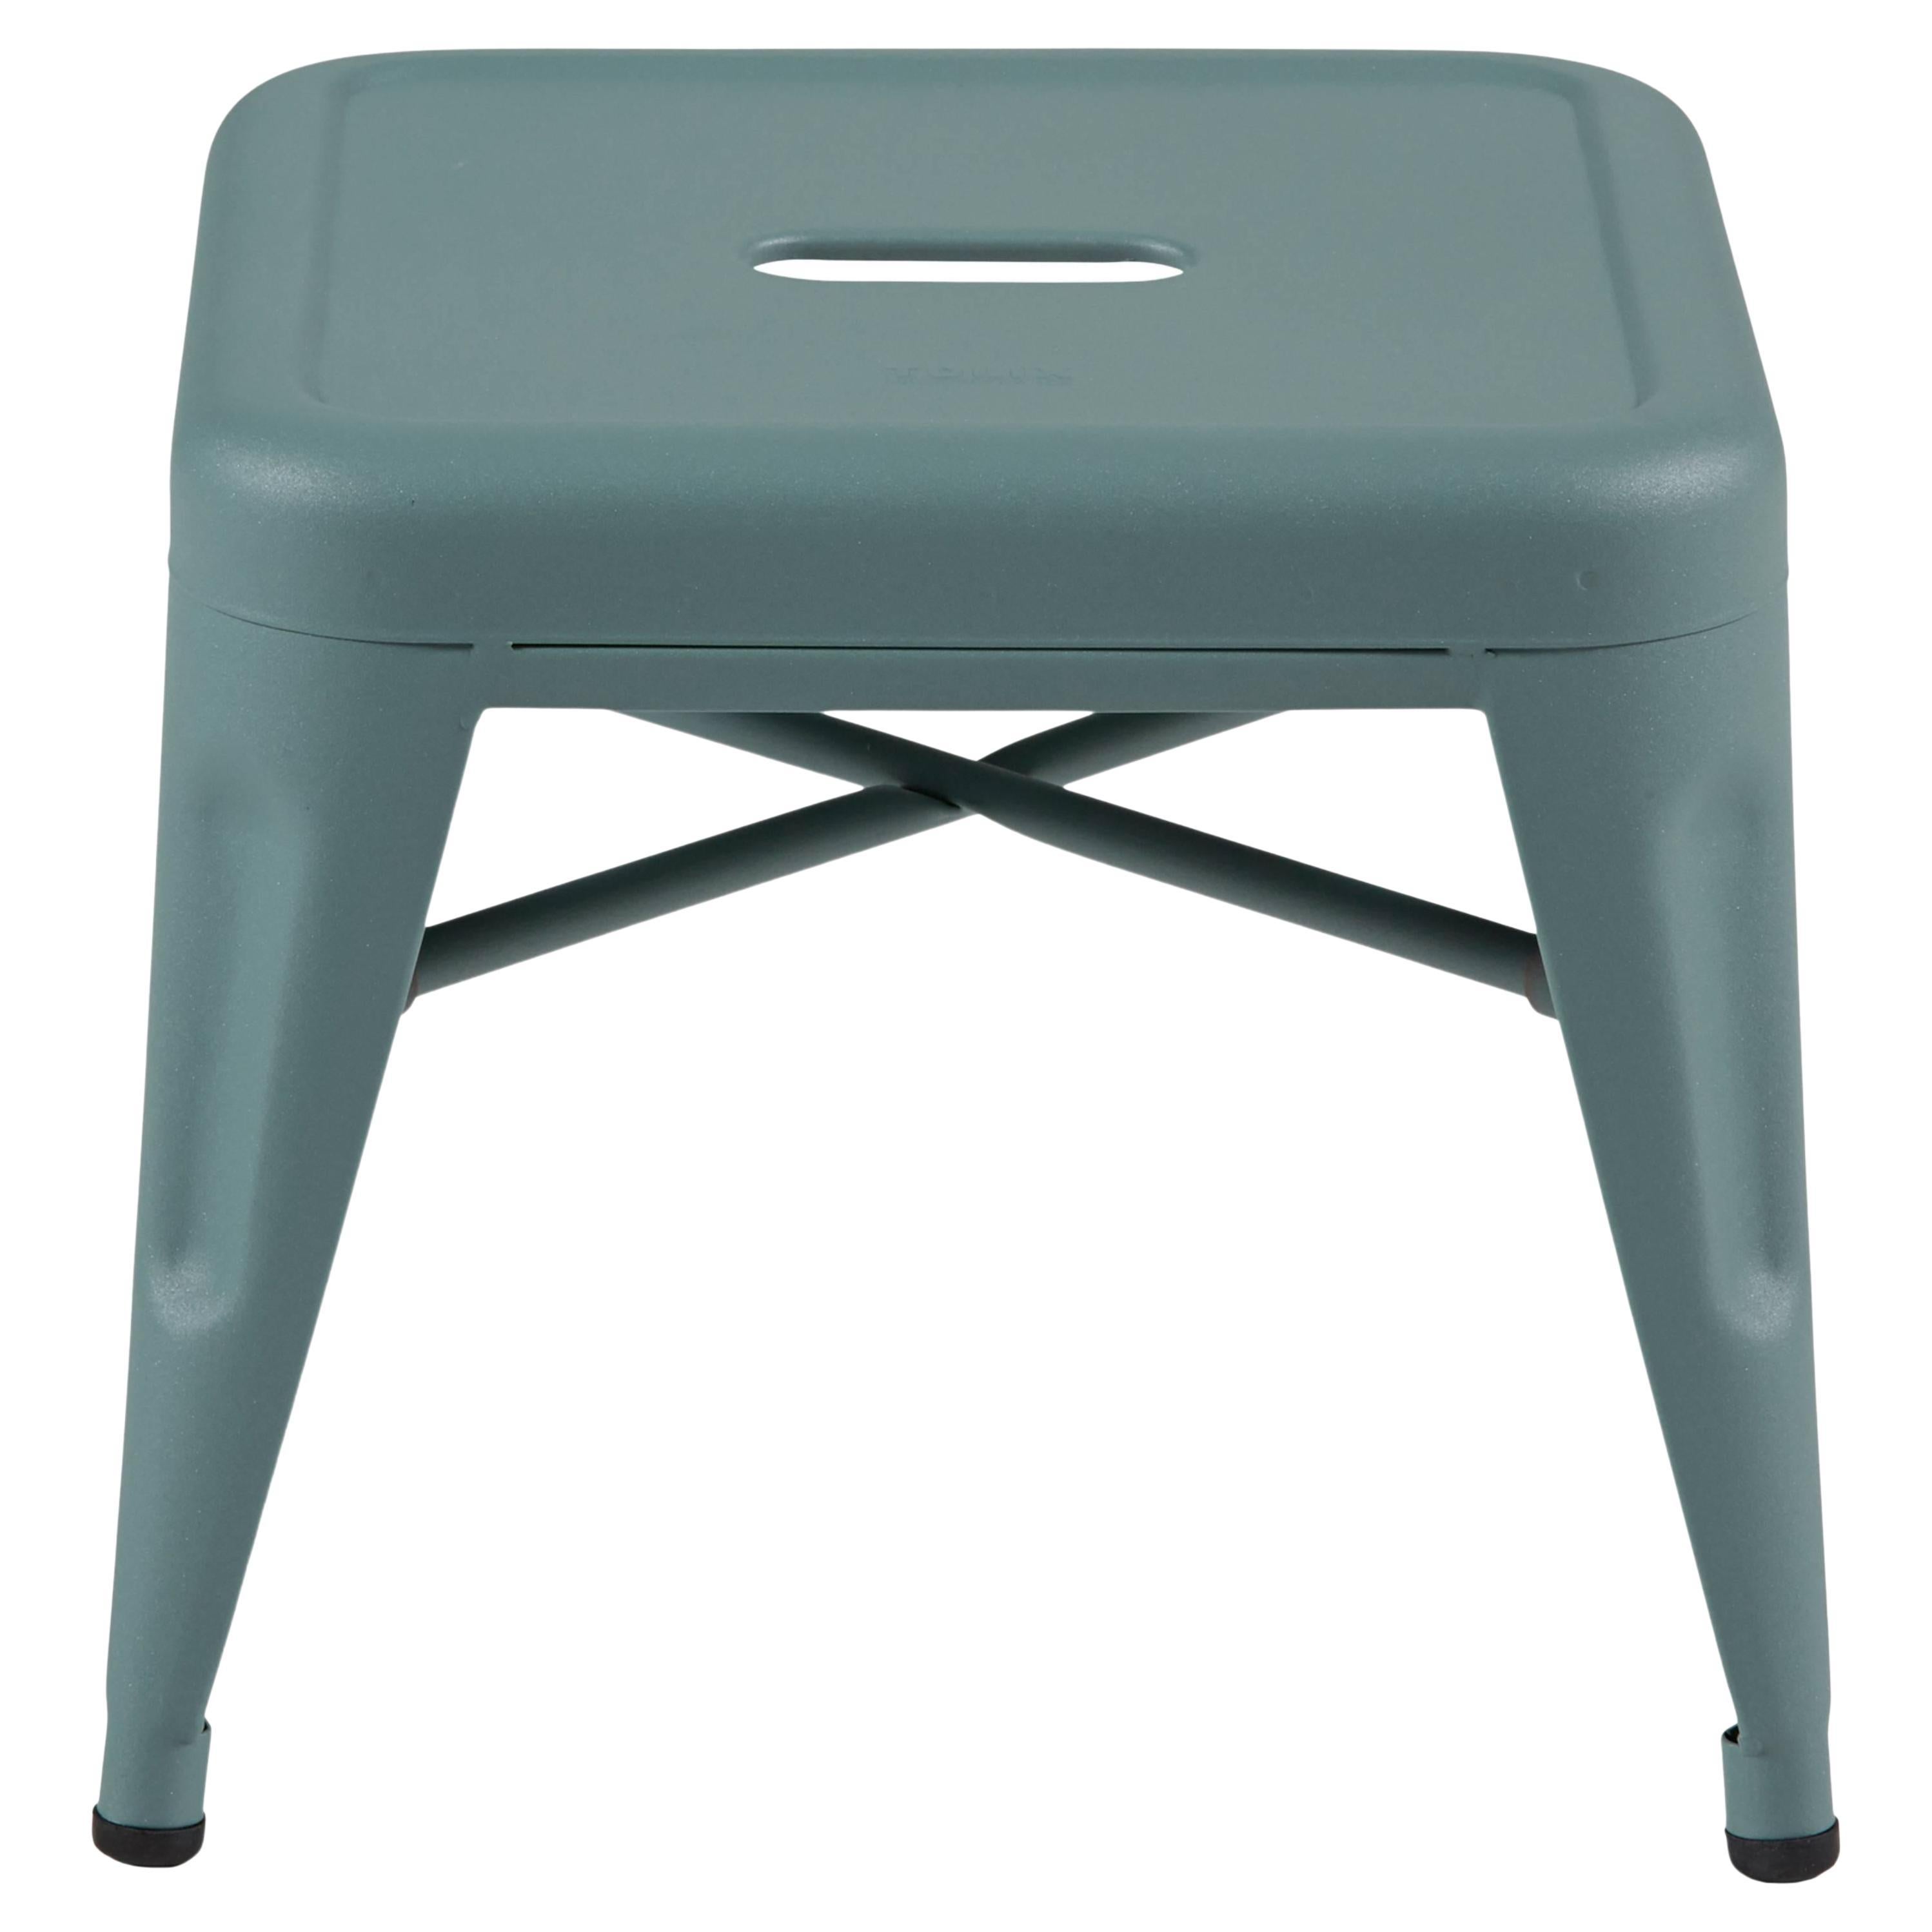 H Stool 30 in Tendance Sage Green by Chantal Andriot and Tolix